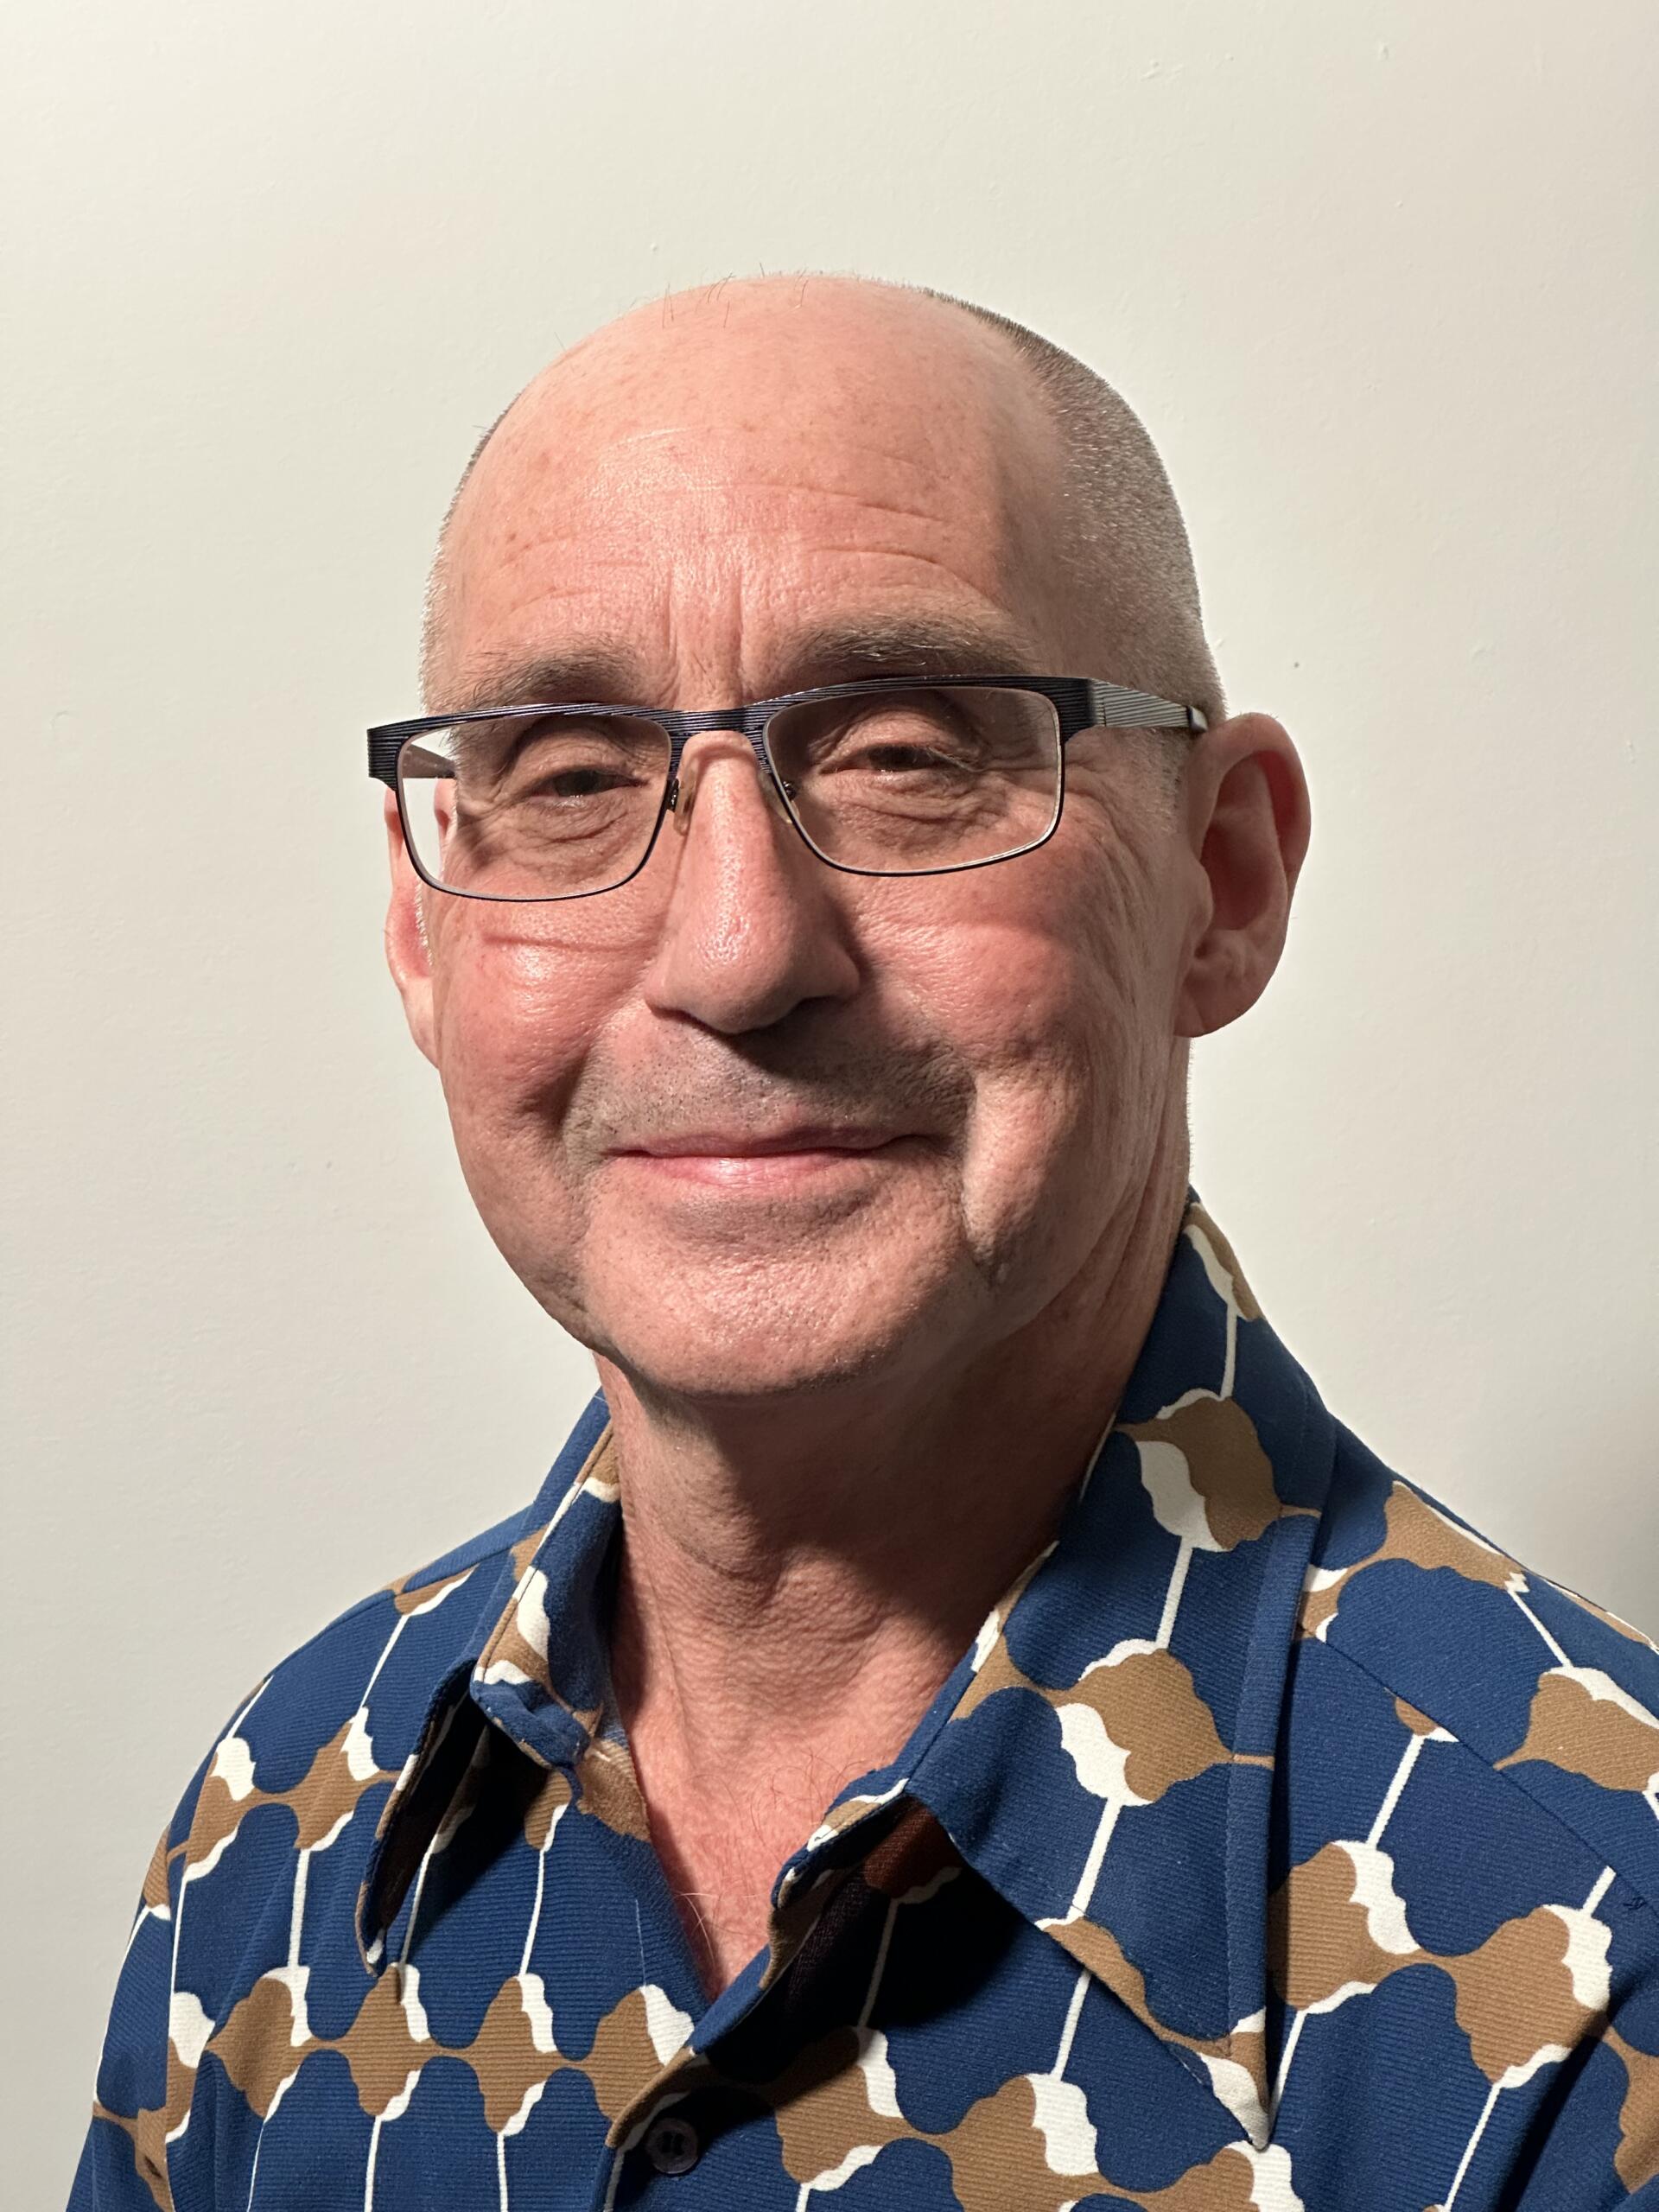 a man wearing glasses and a blue shirt.